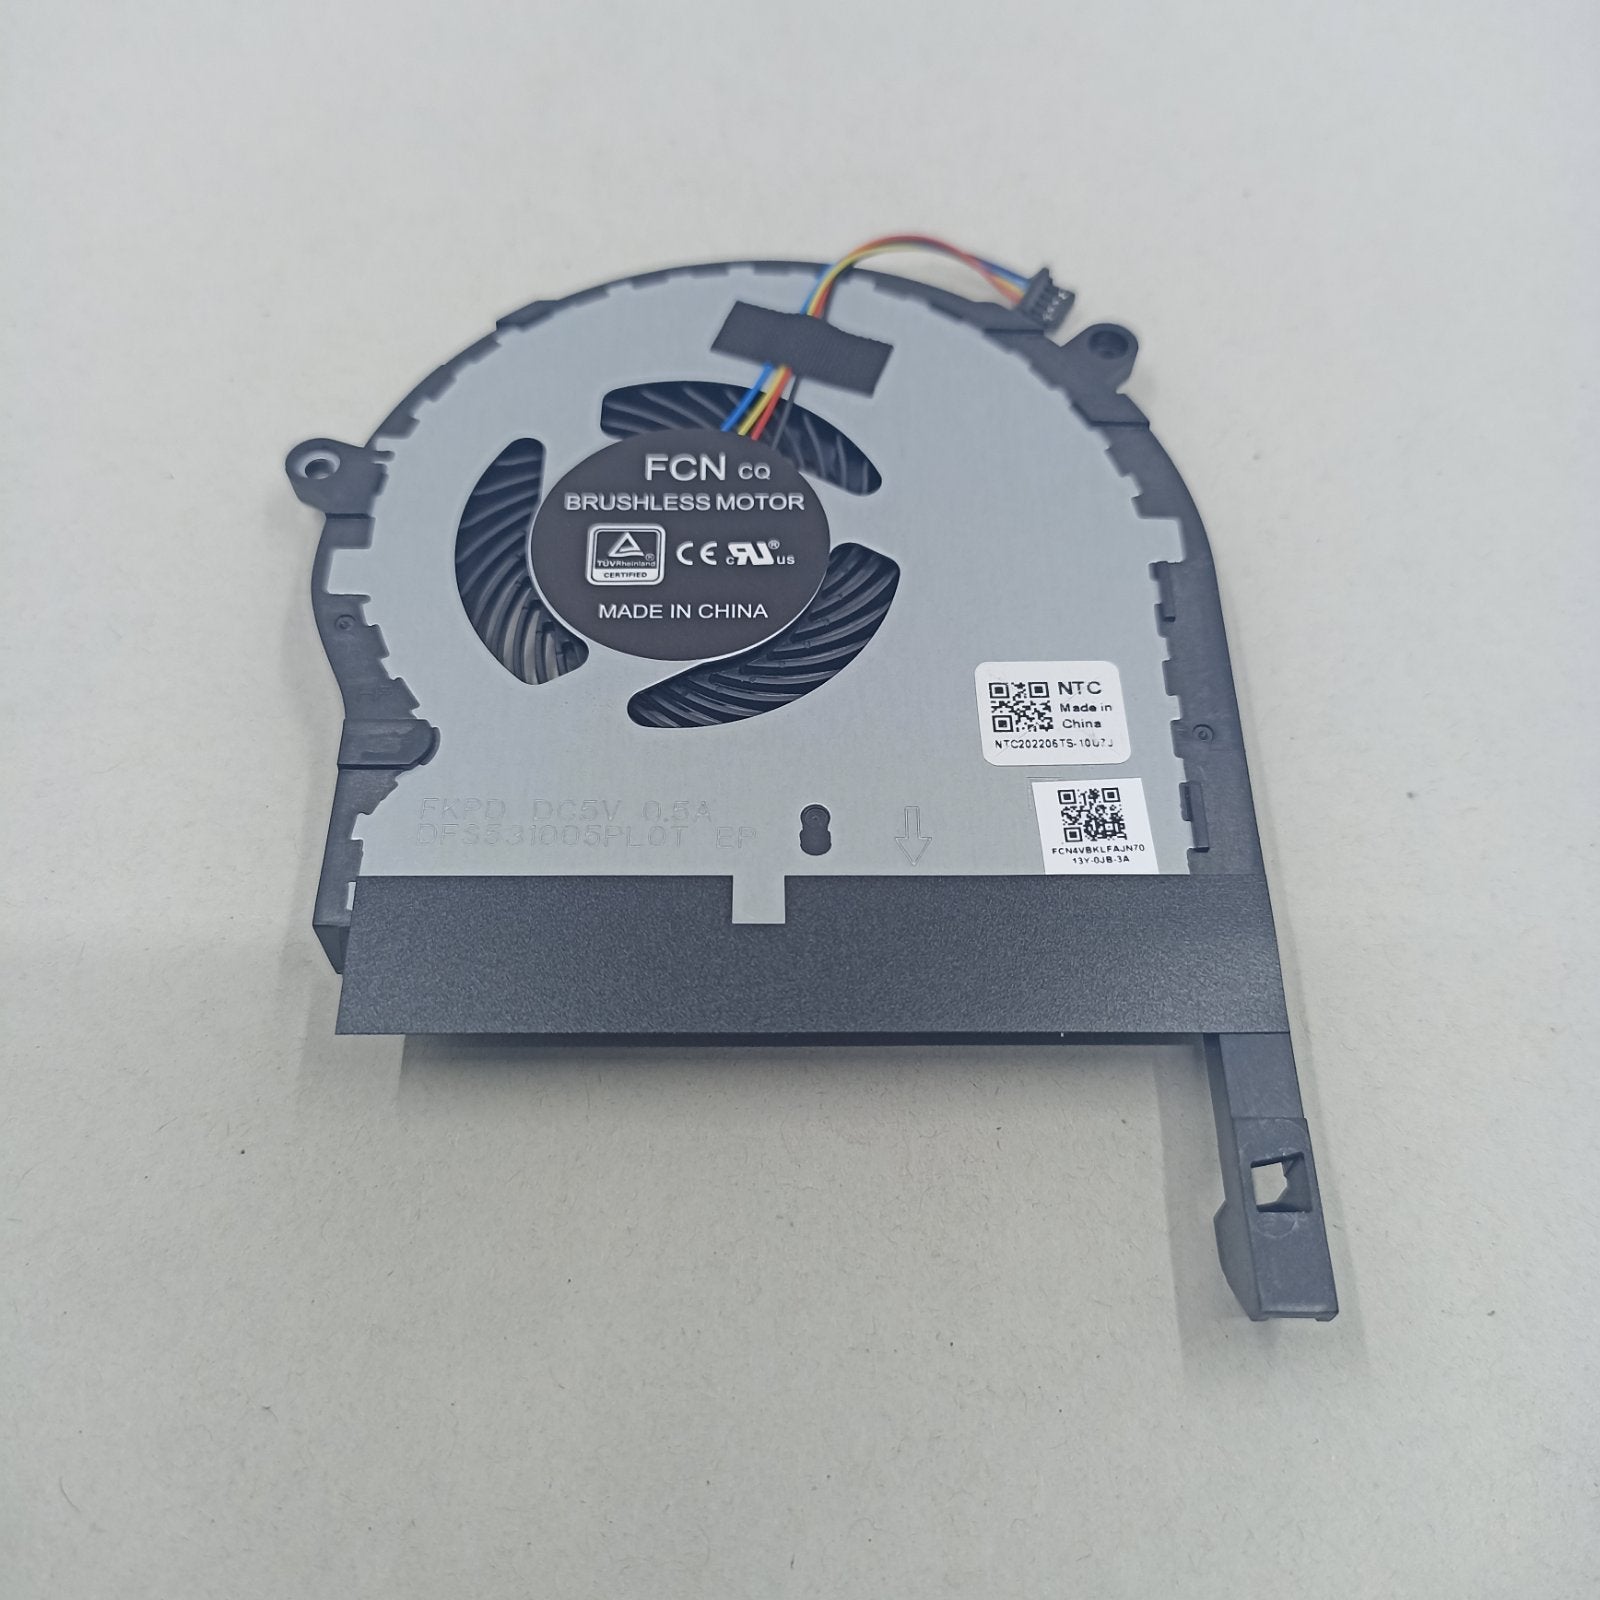 Replacement Fan for Asus FX504GD WL